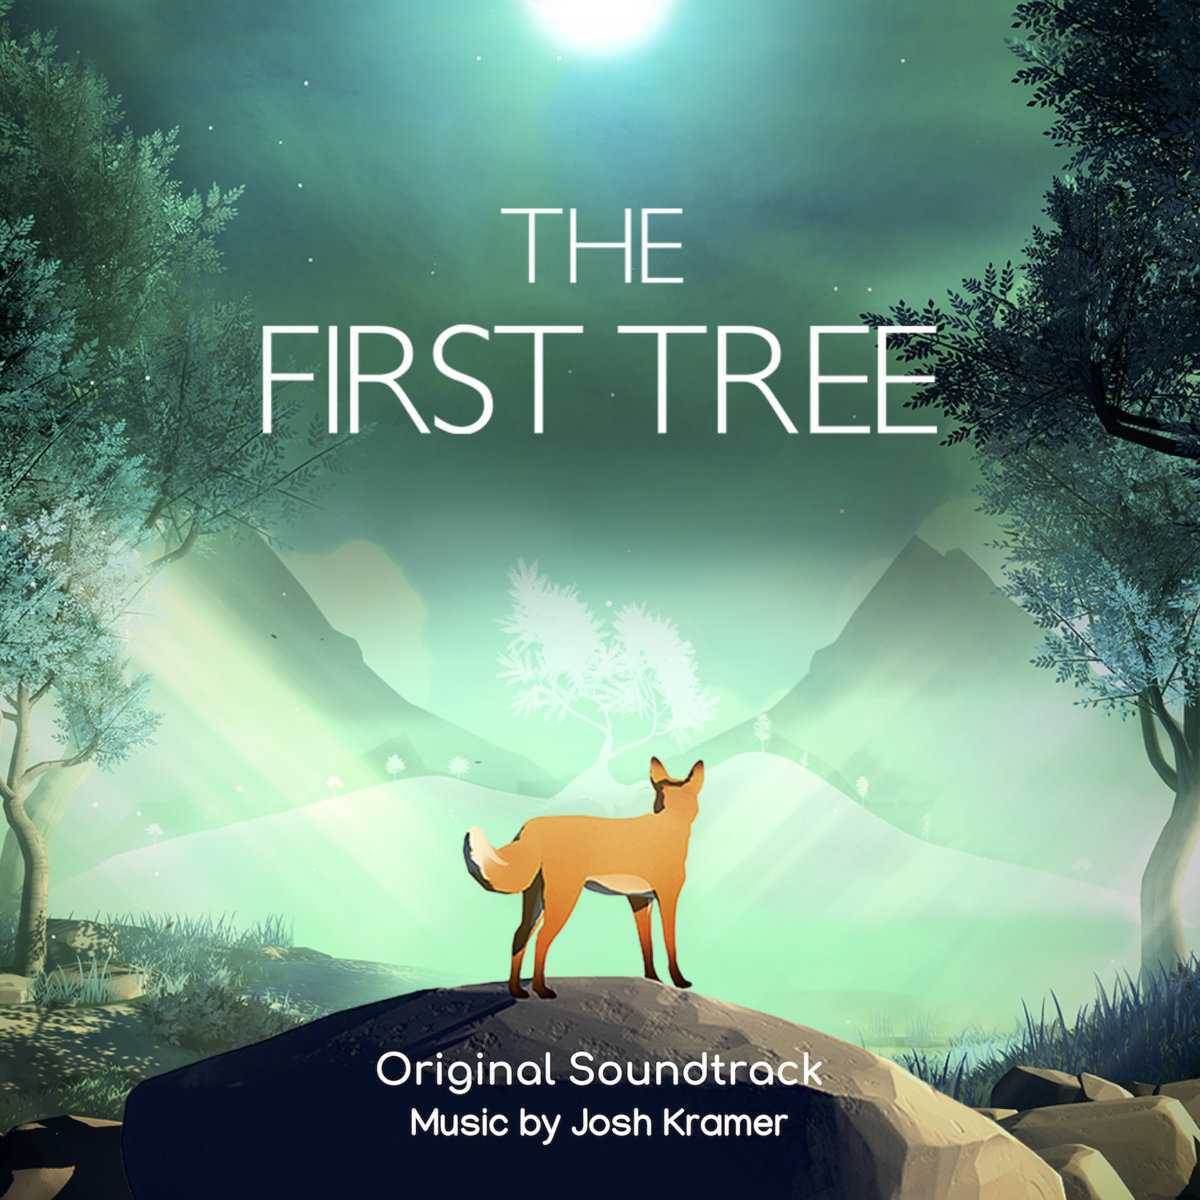 The first tree